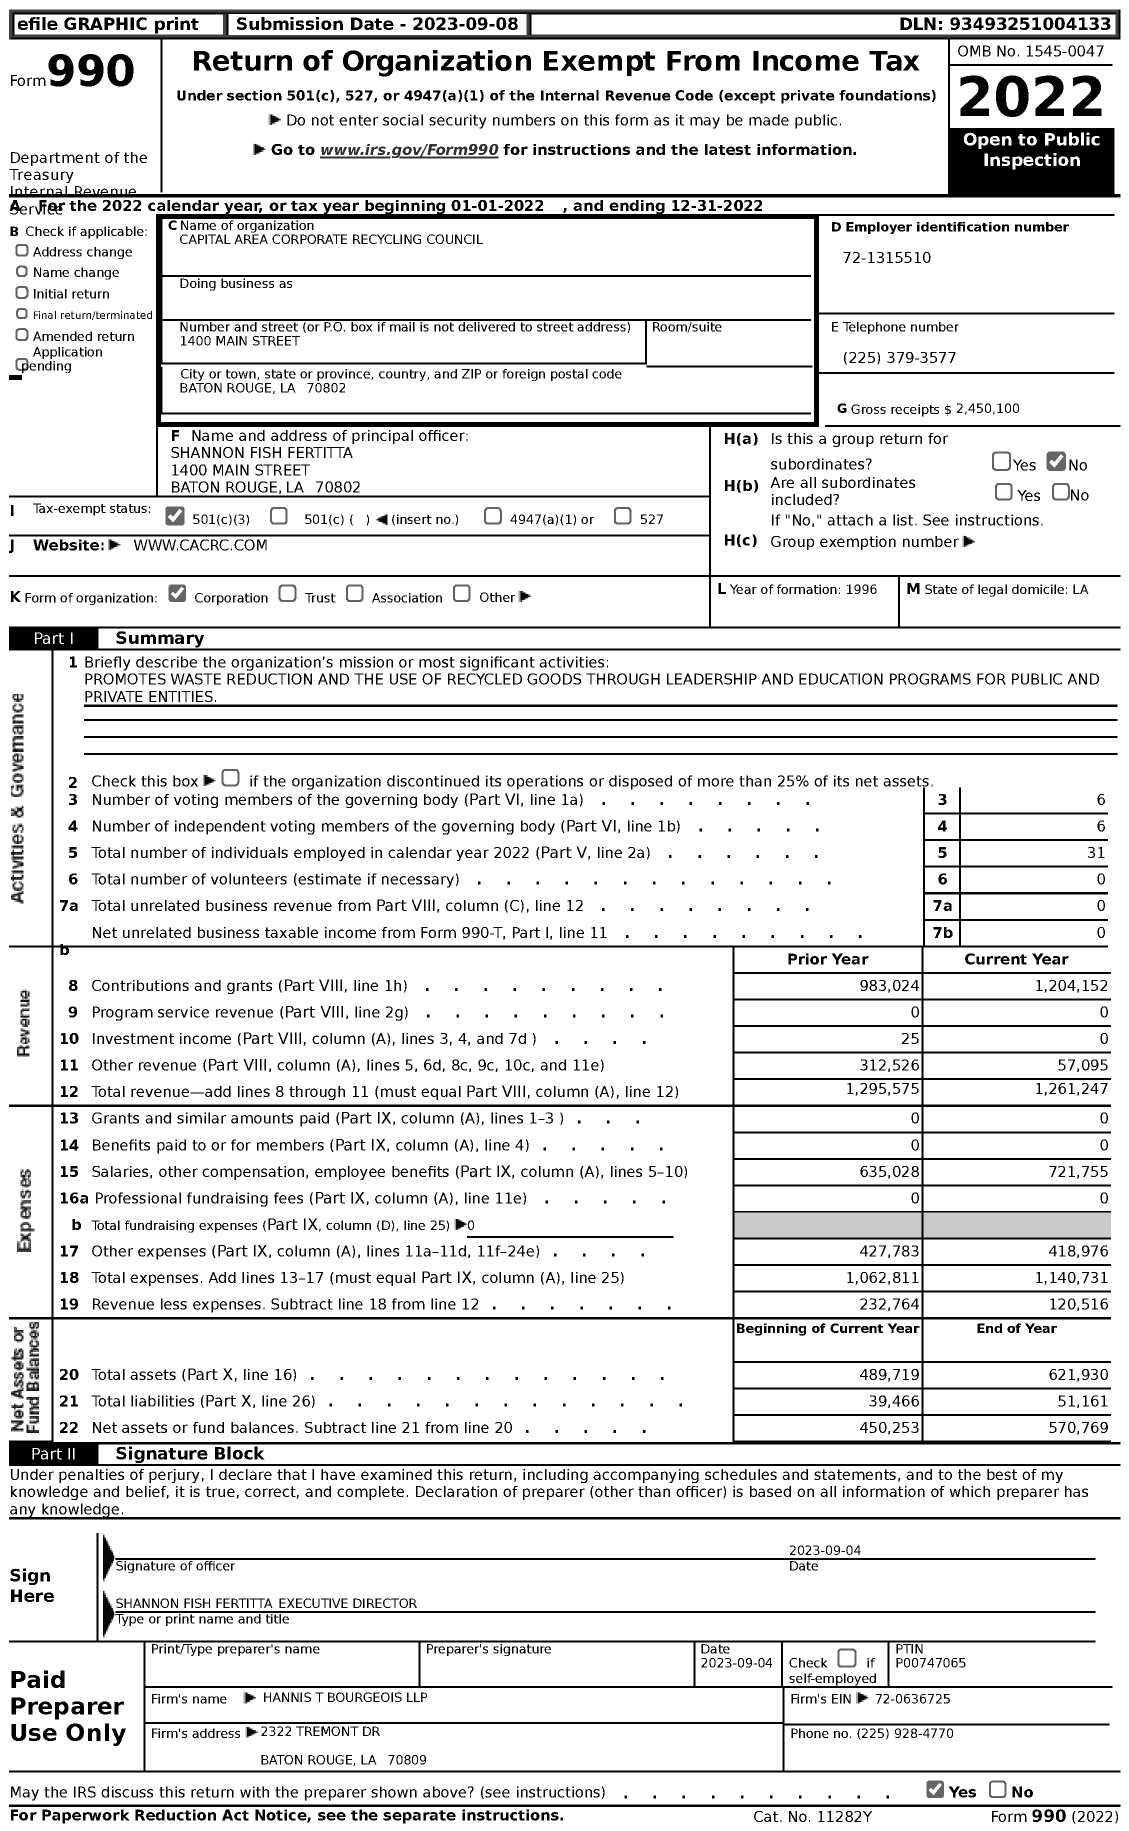 Image of first page of 2022 Form 990 for Capital Area Corporate Recycling Council